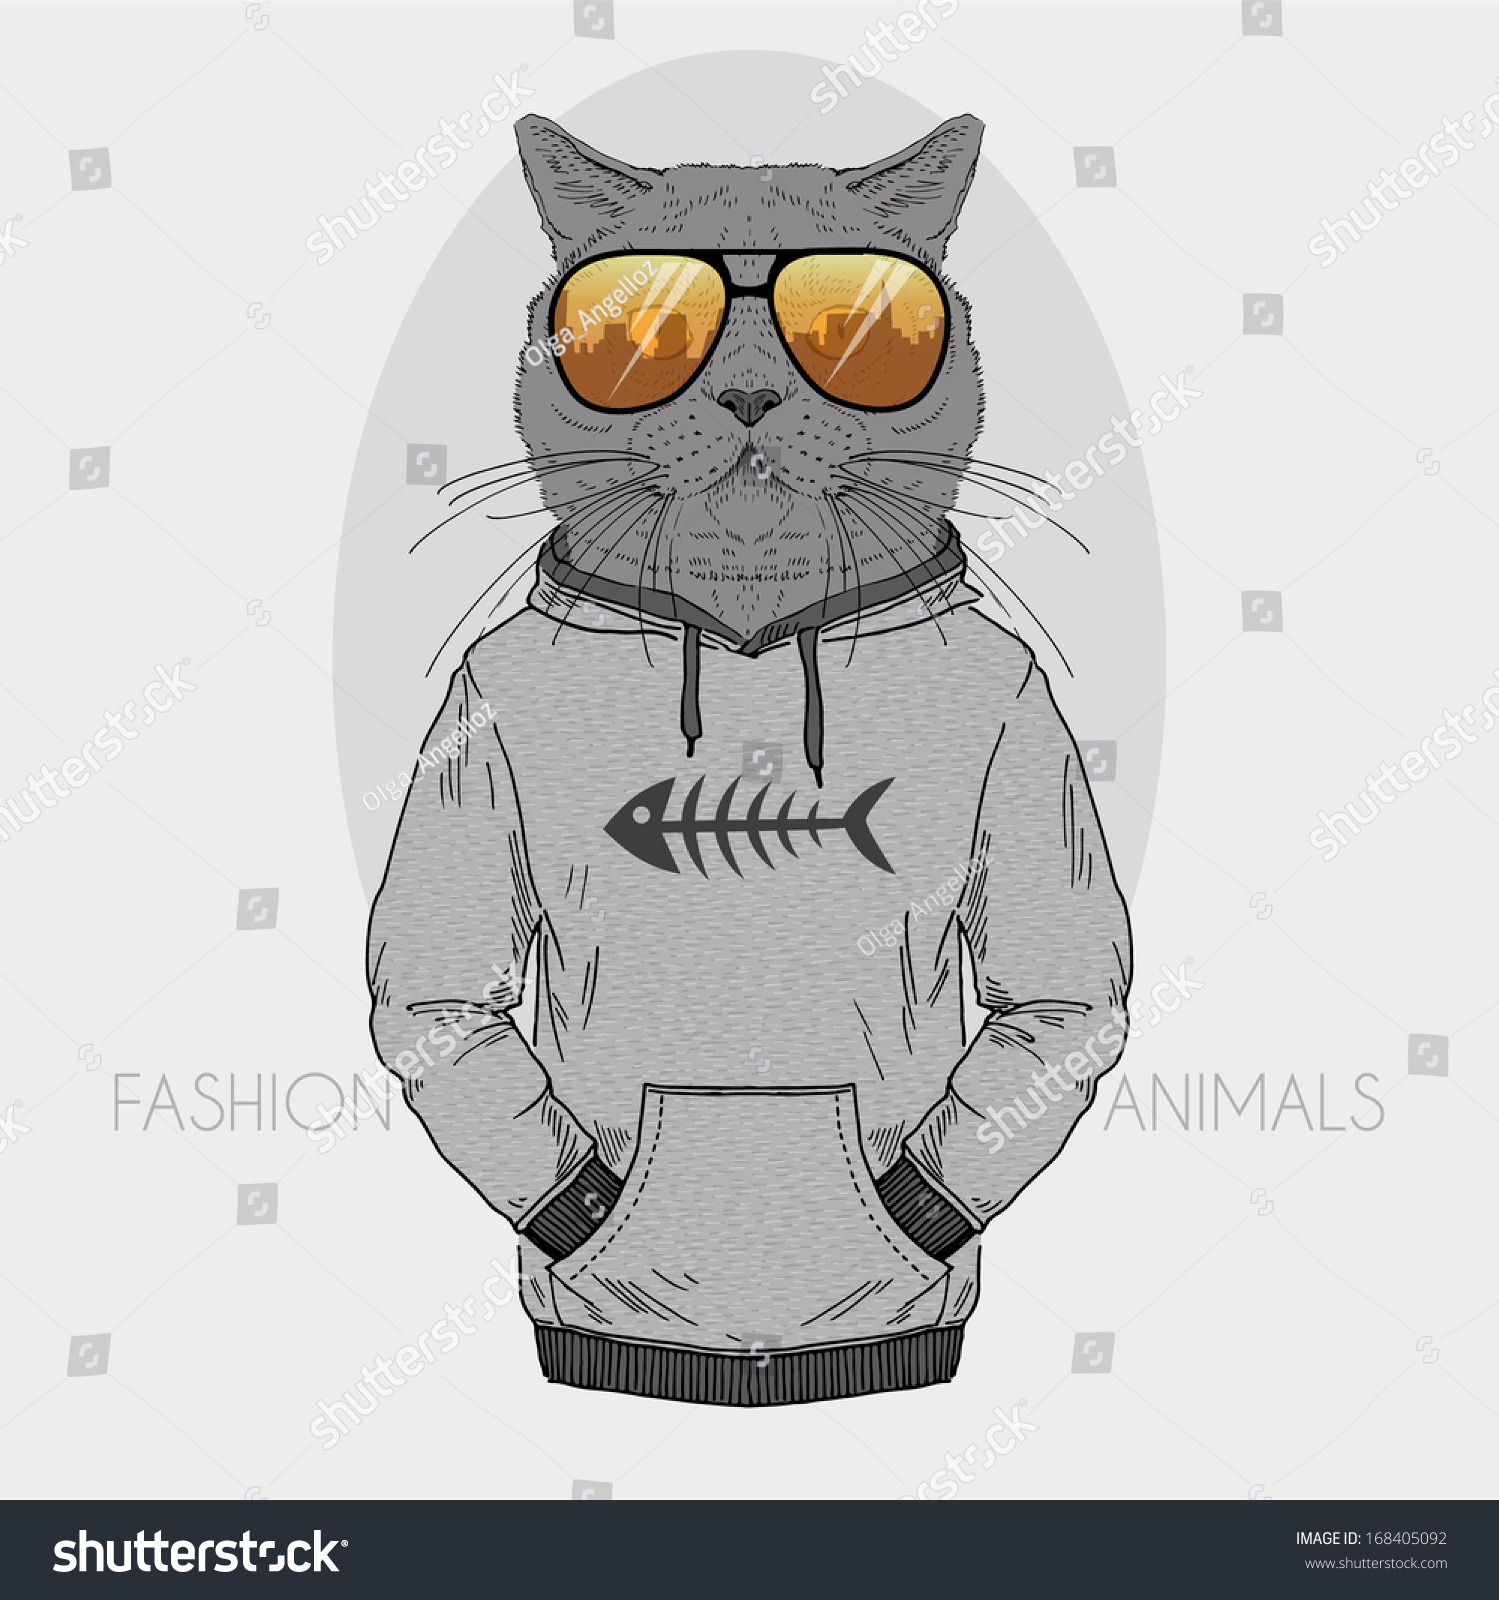 SVG of Hand Drawn Fashion Illustration of dressed up cat, City Look, in colors svg